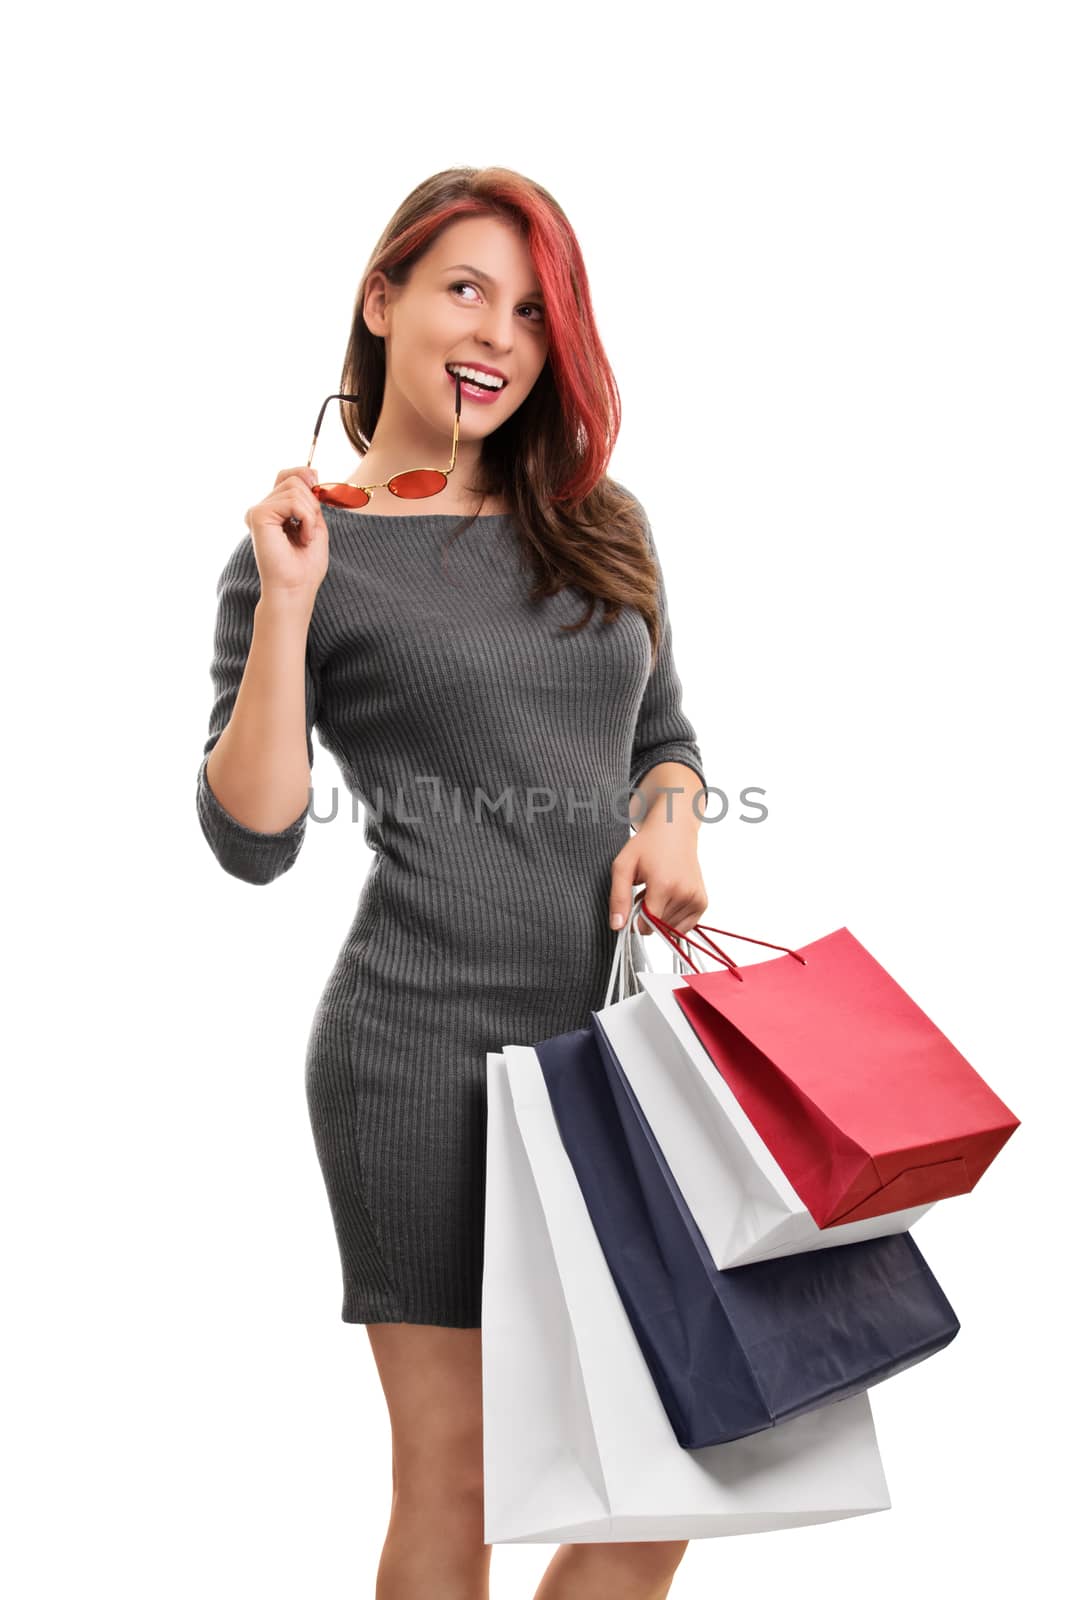 Girl with glasses and shopping bags by Mendelex